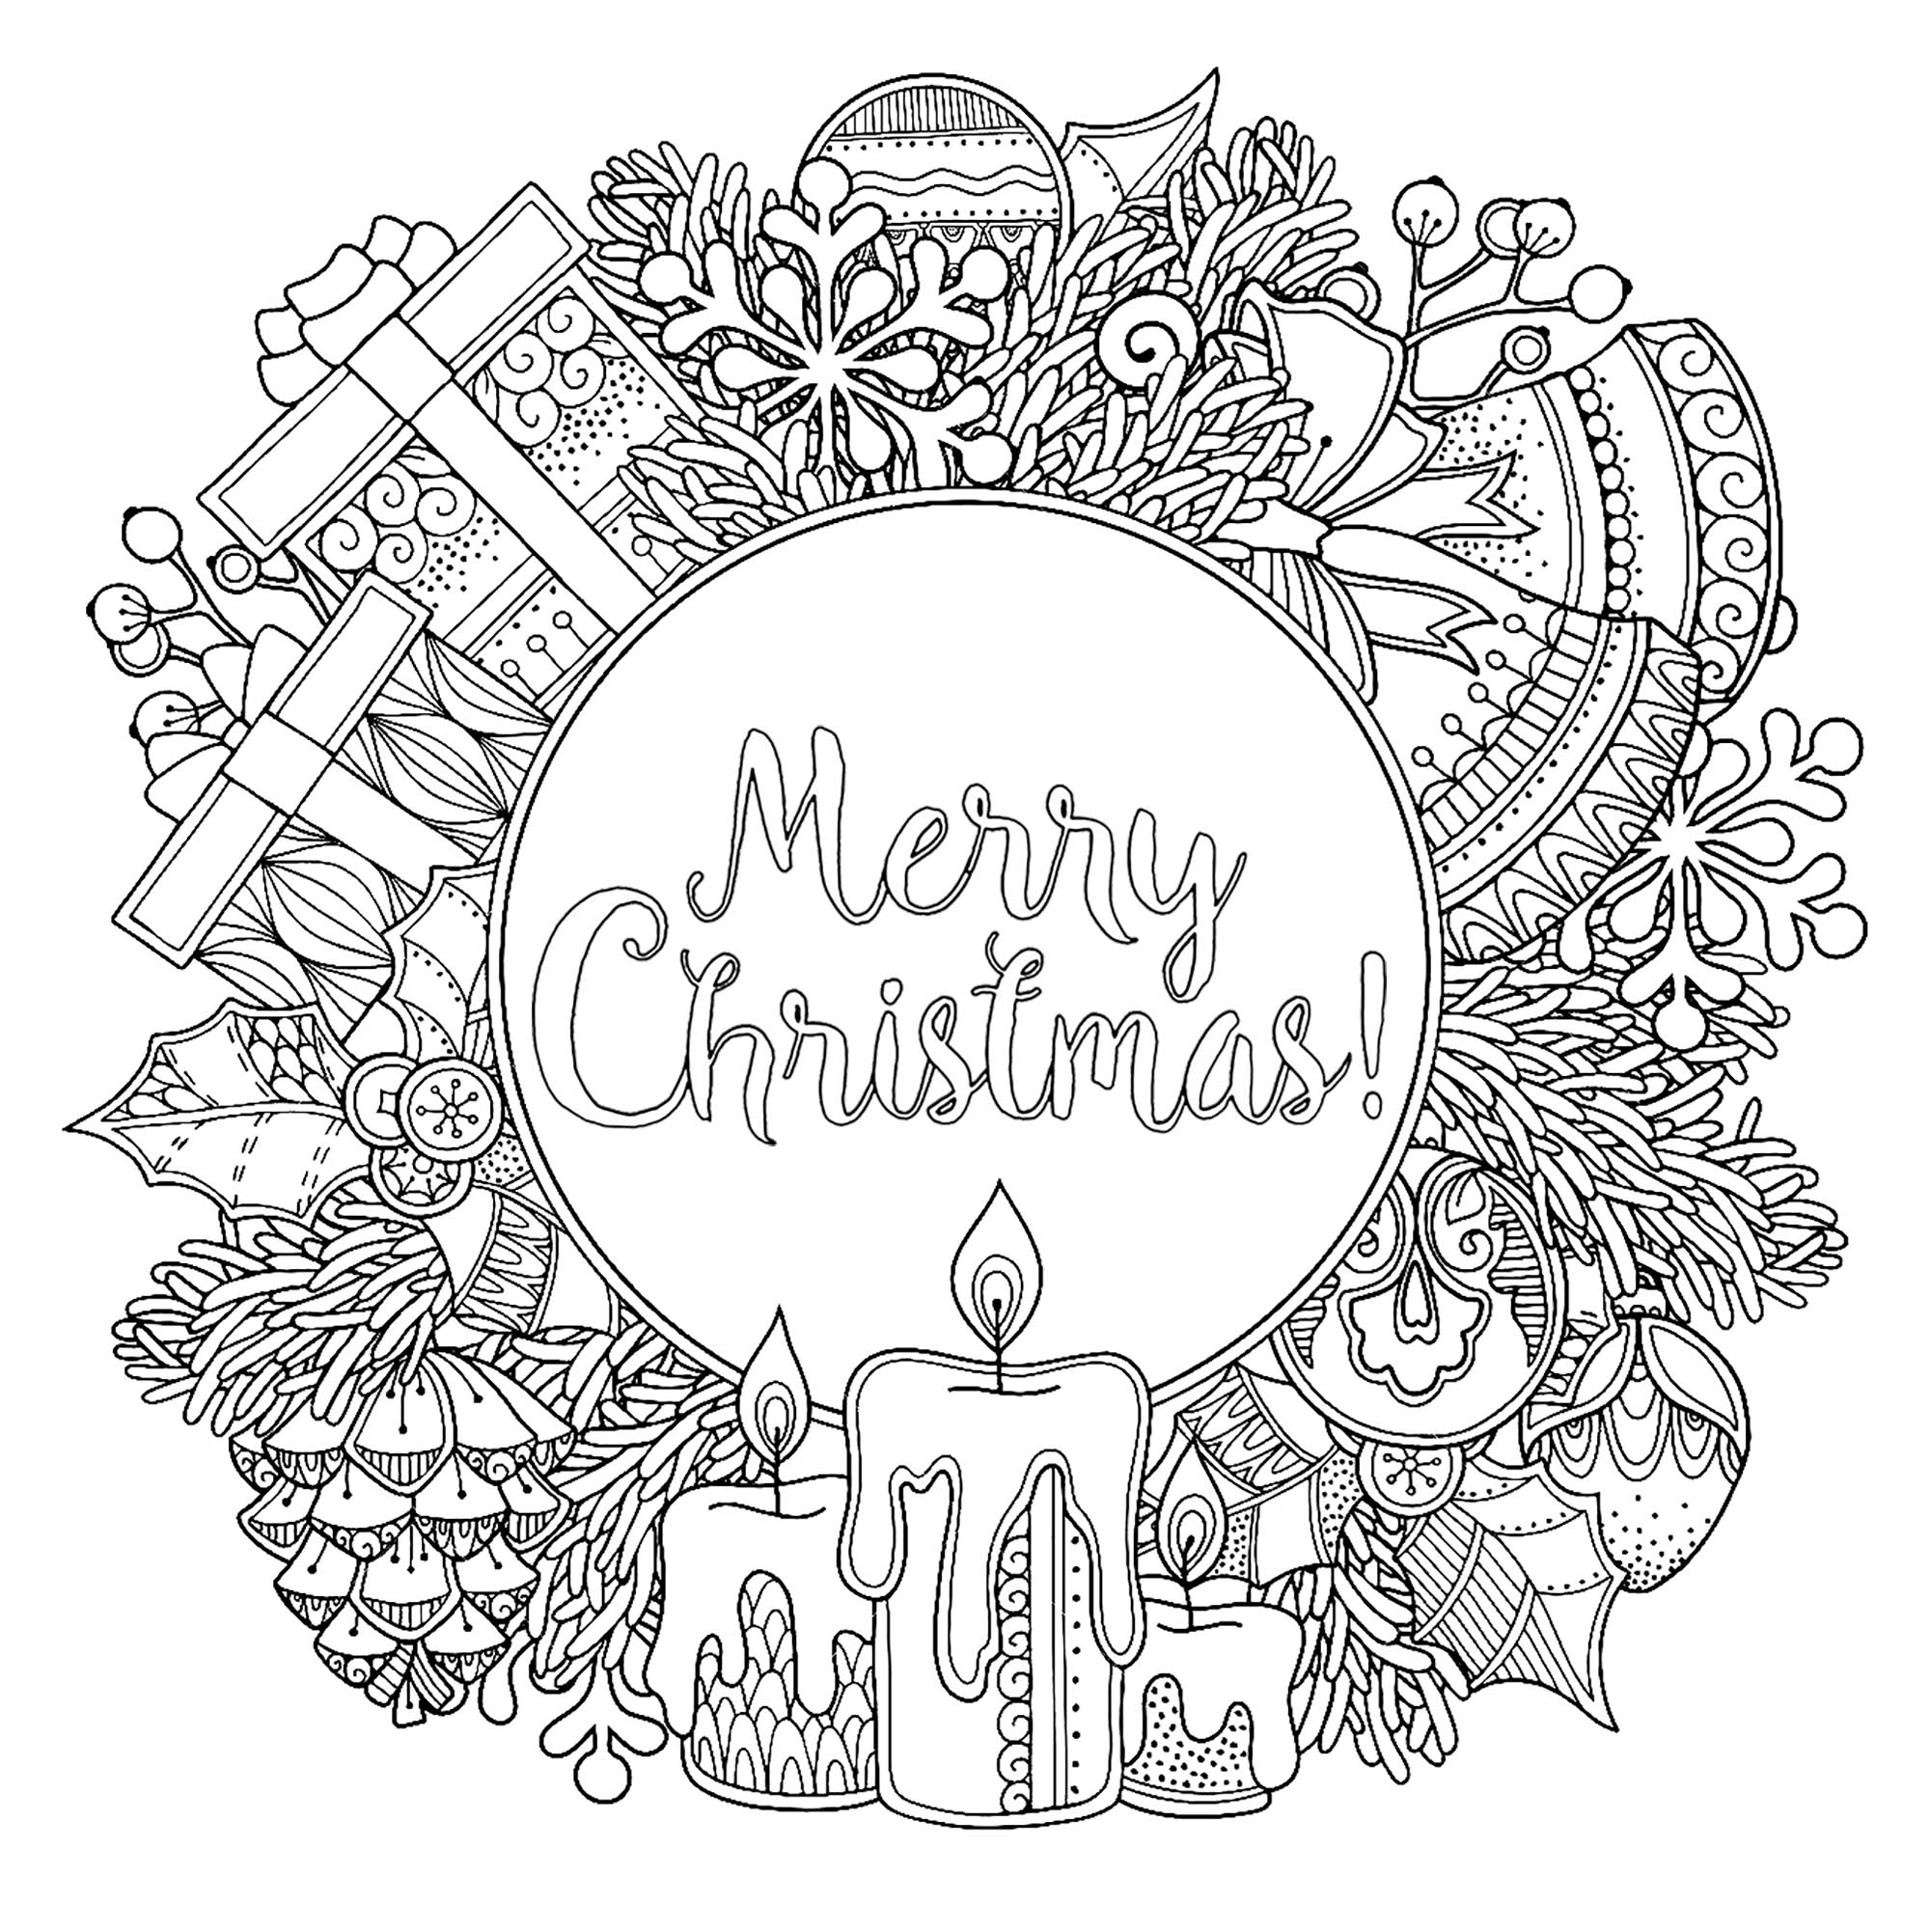 Doodl-Christmas-wreath---Christmas-Adult-Coloring-Pages